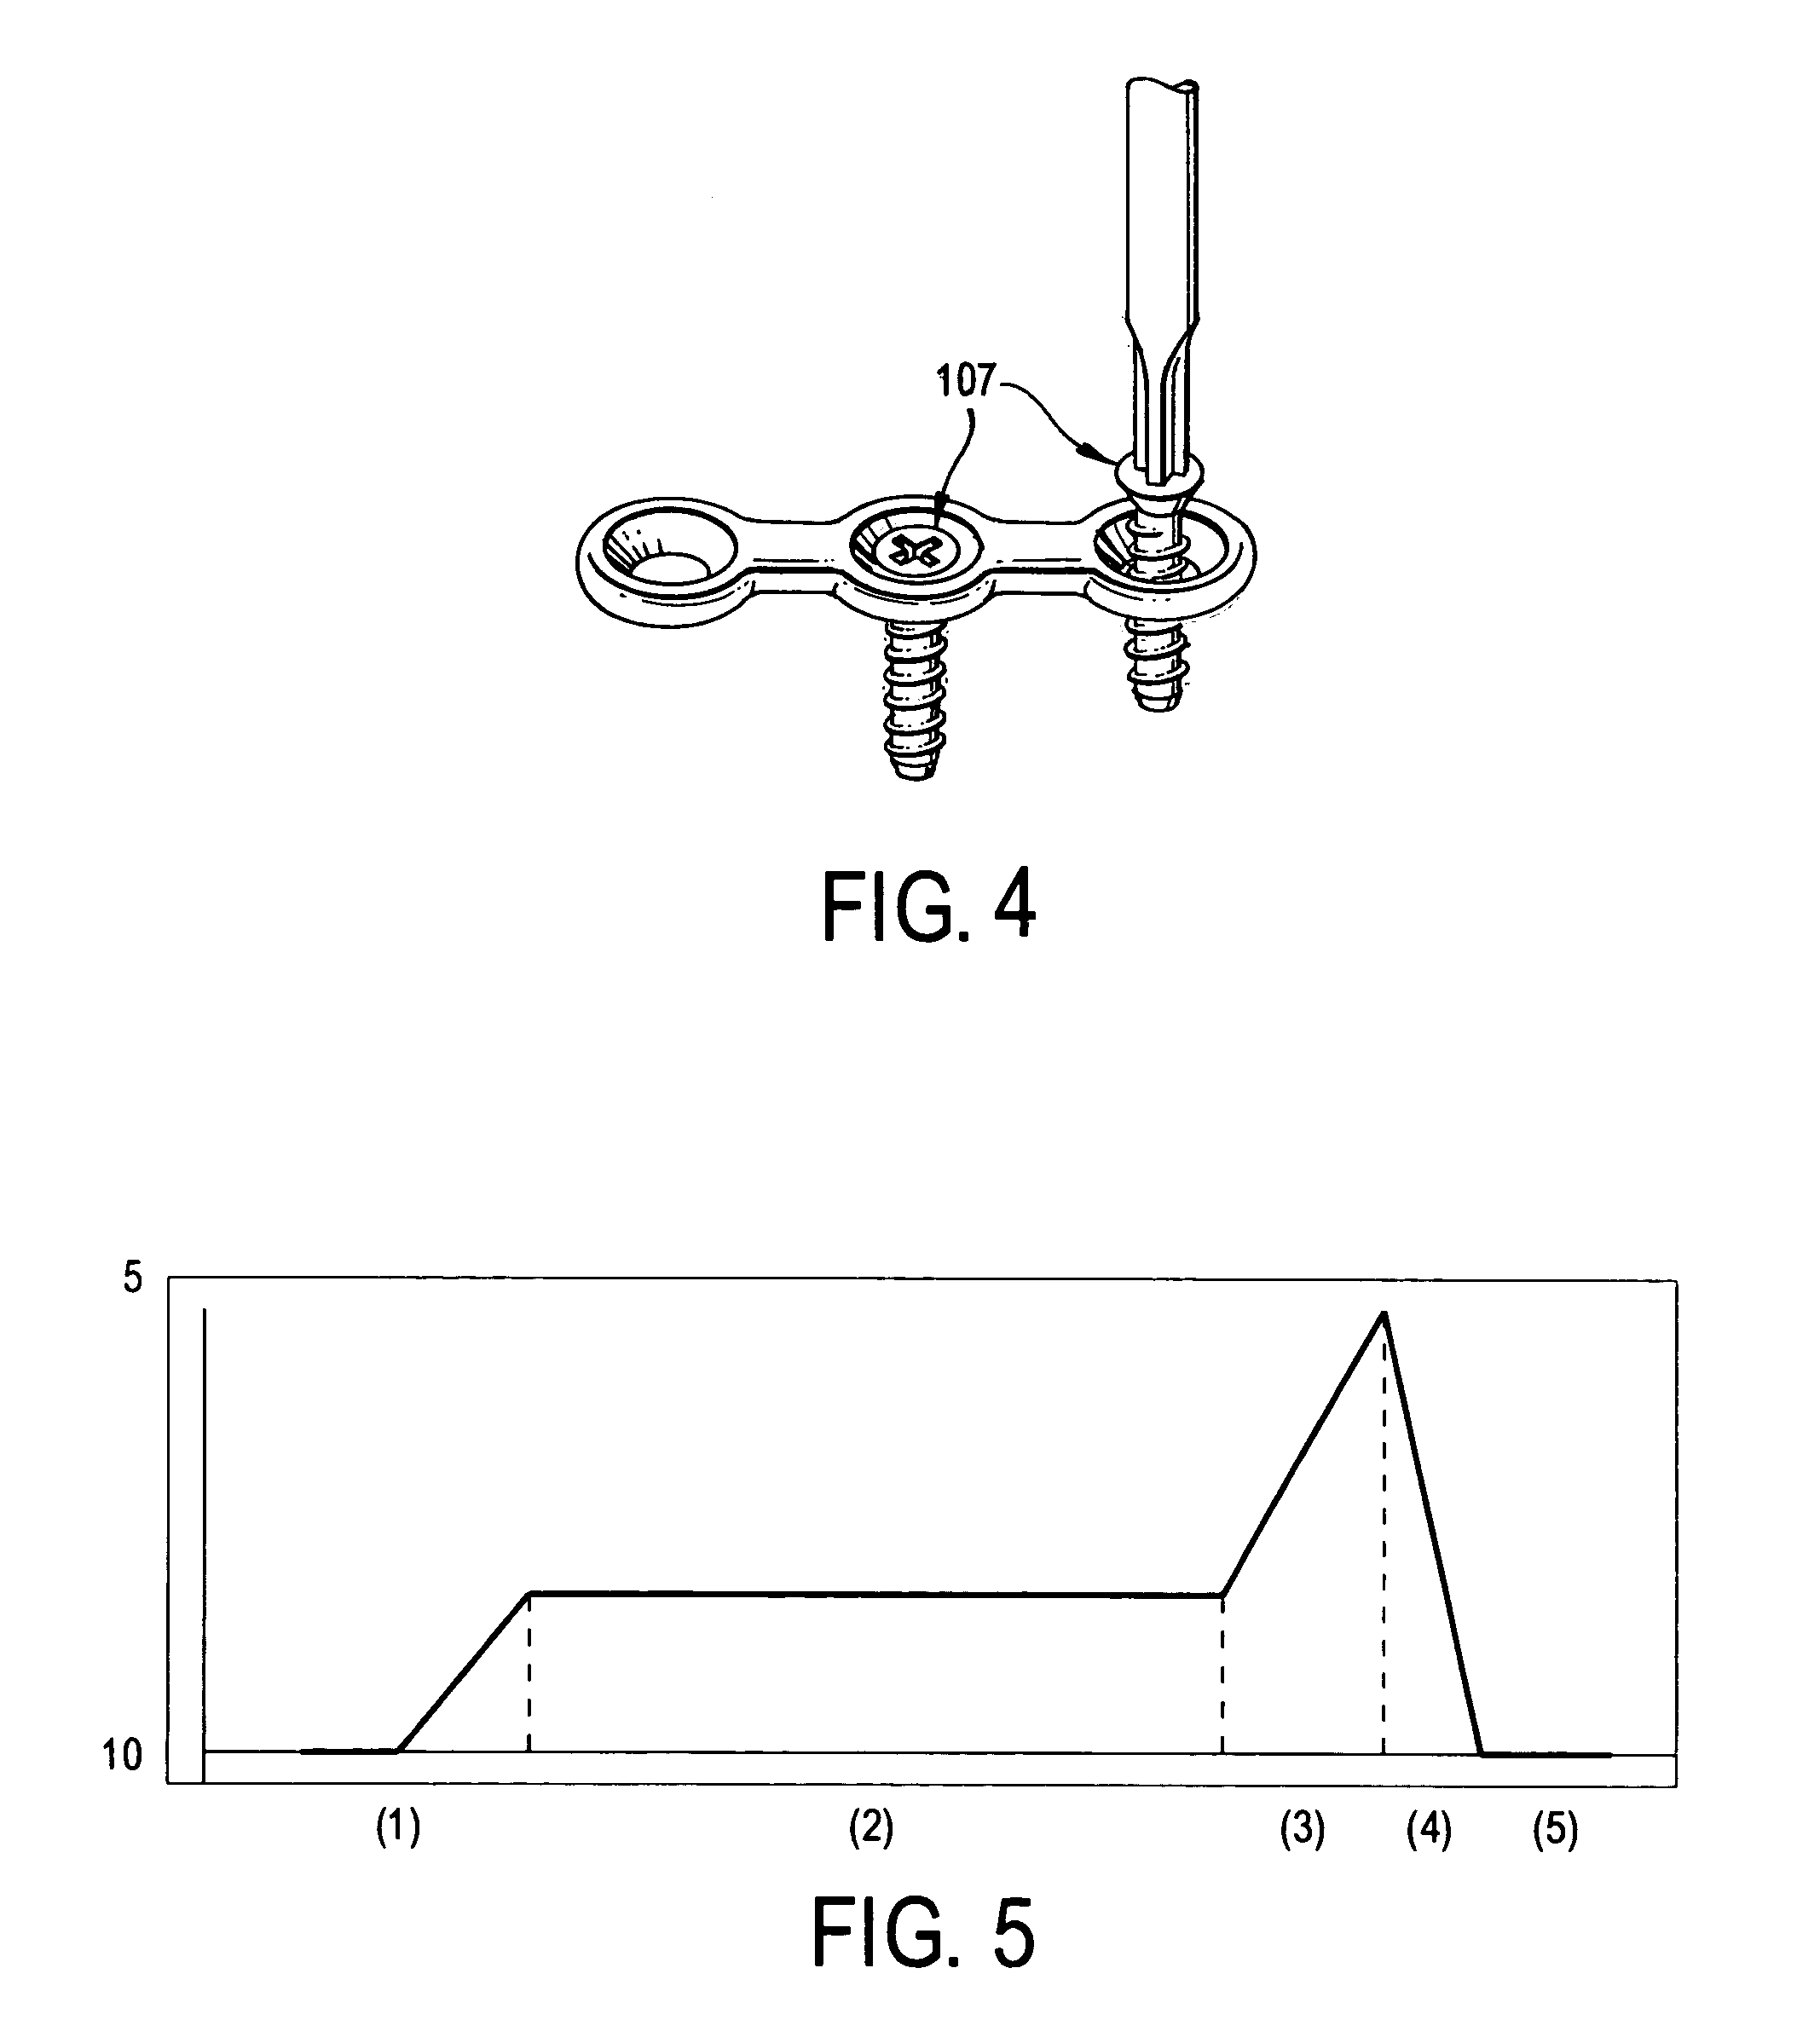 Method of monitoring and controlling the seating of screws to the optimum point of grip independent of screw size and material density